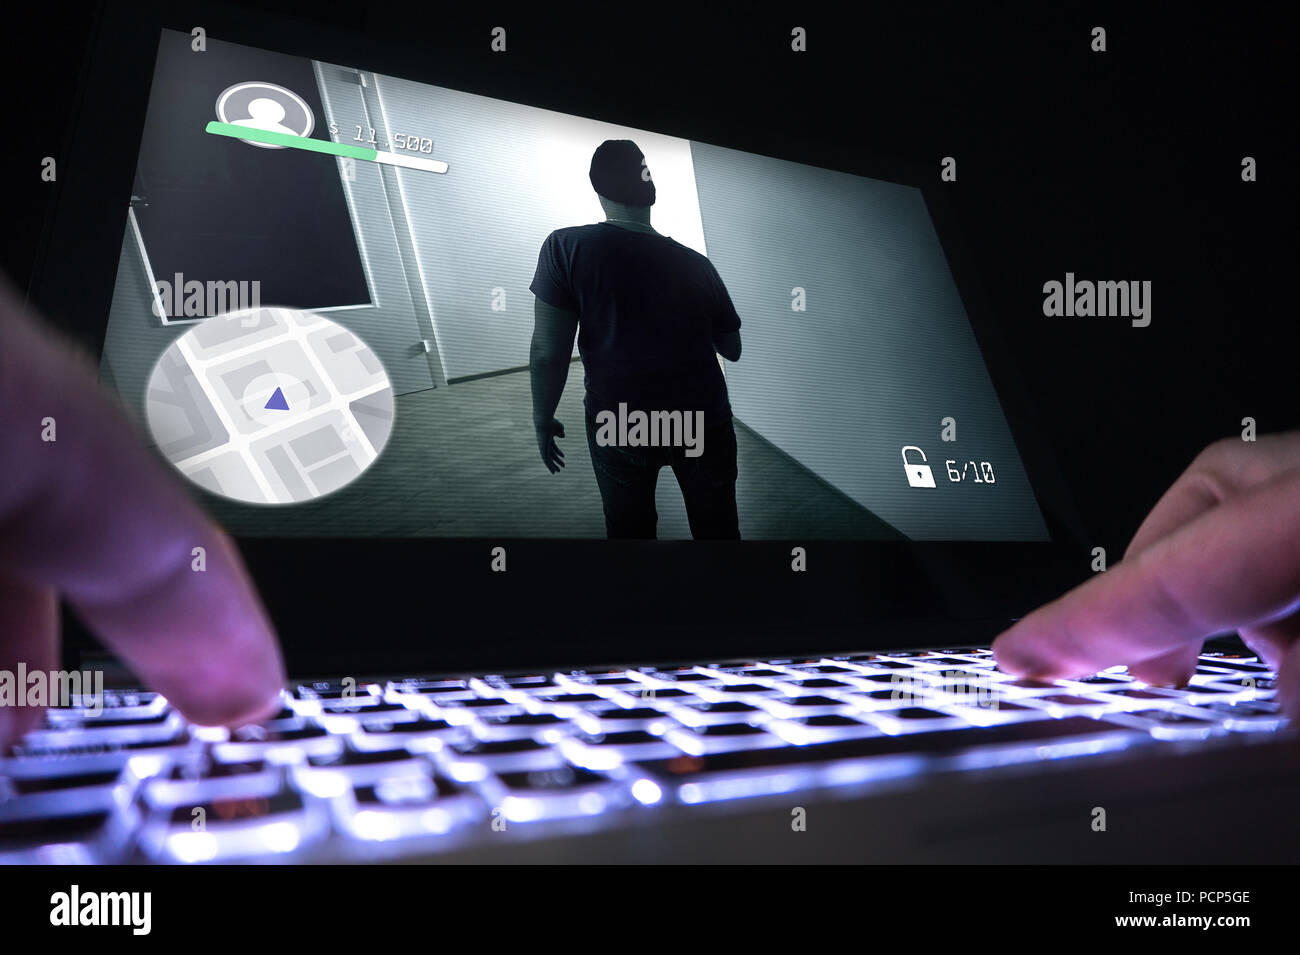 Playing video game with laptop. Computer and online gaming concept. Competitive gaming, electronic sports and esports. Stock Photo